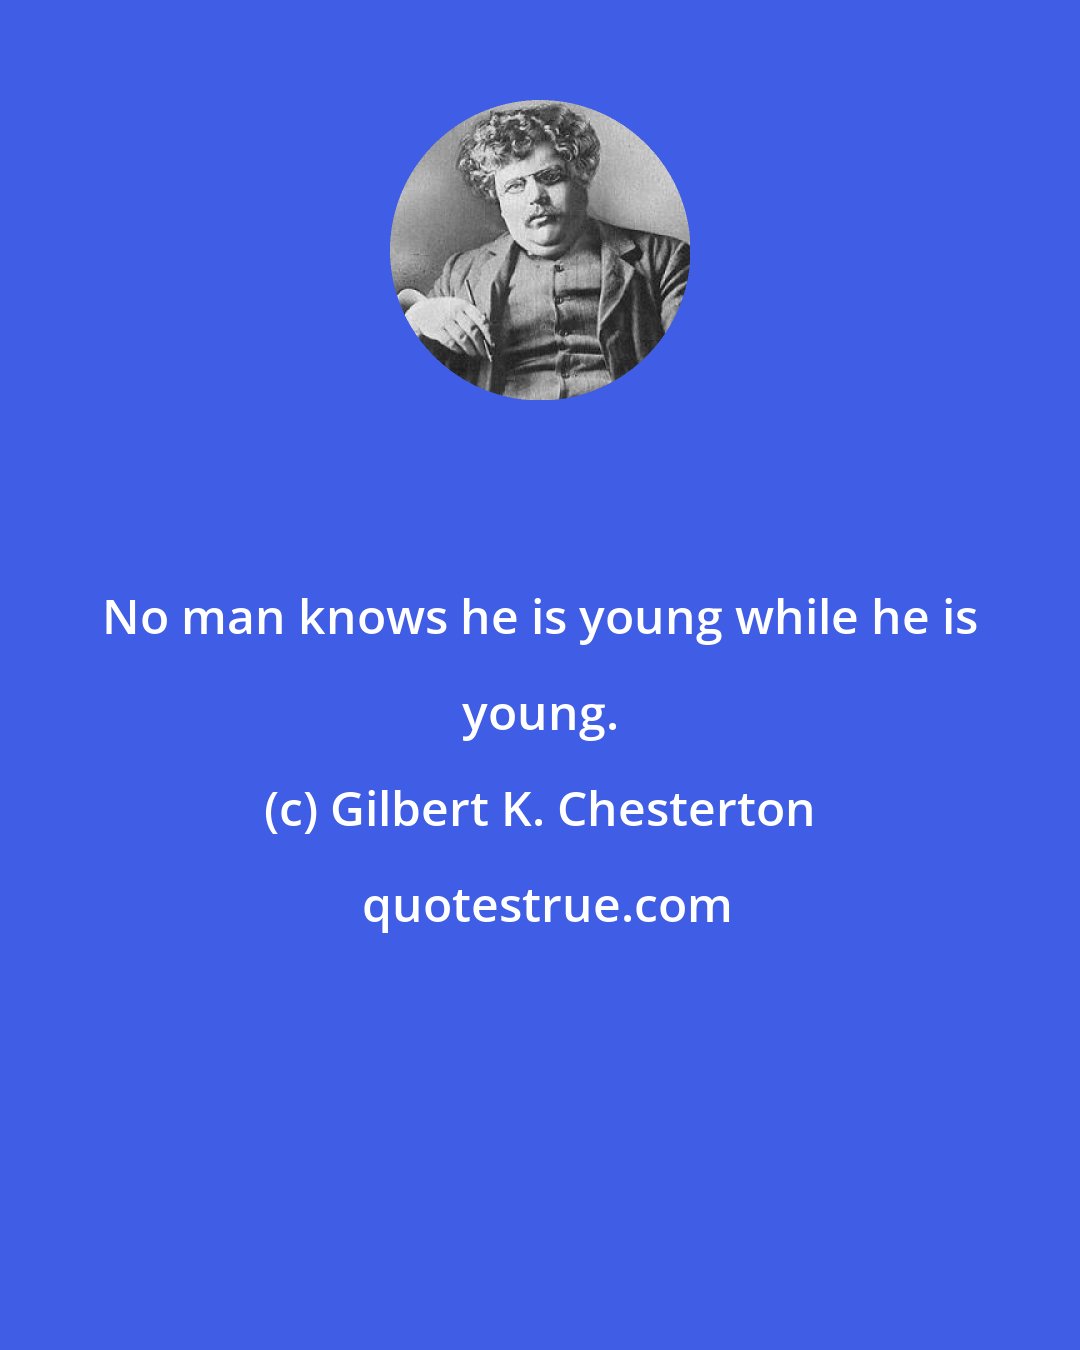 Gilbert K. Chesterton: No man knows he is young while he is young.